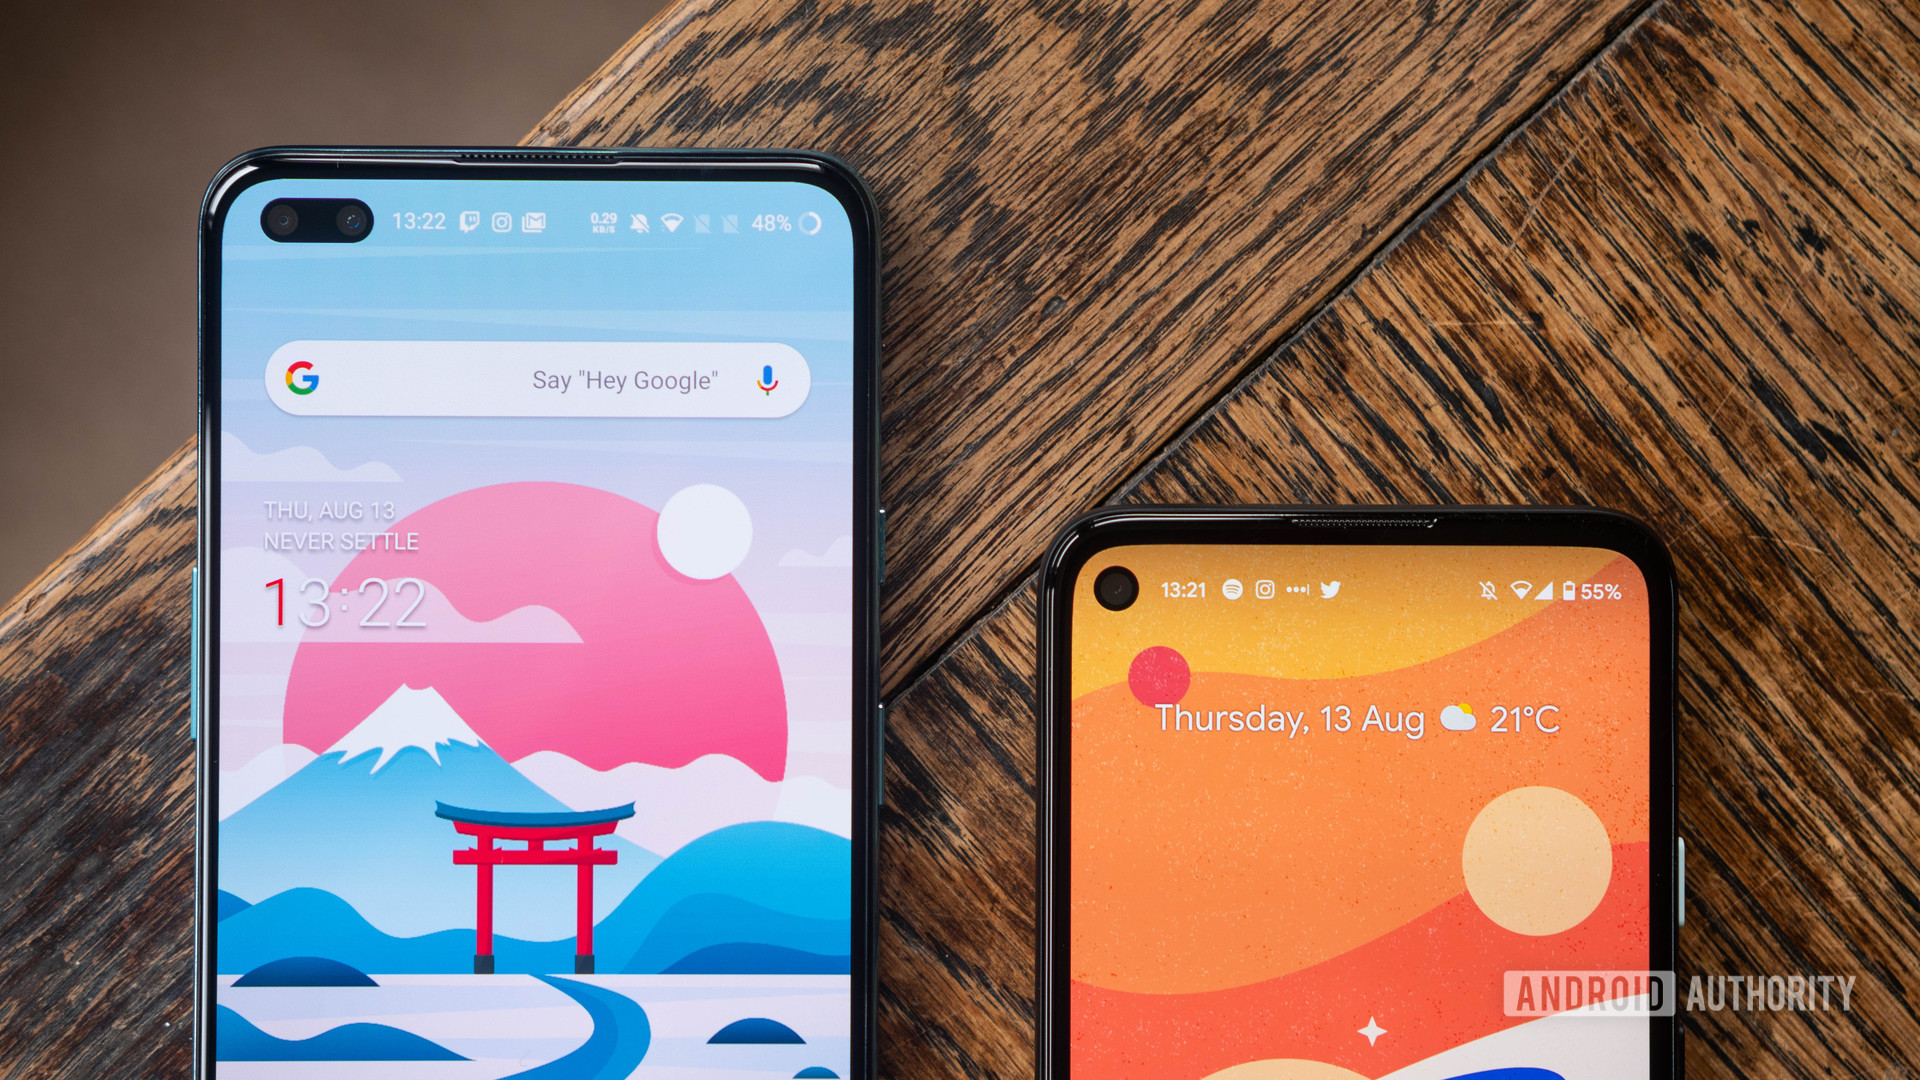 OnePlus Nord vs Pixel 4a The top of both devices side by side in a staggered view